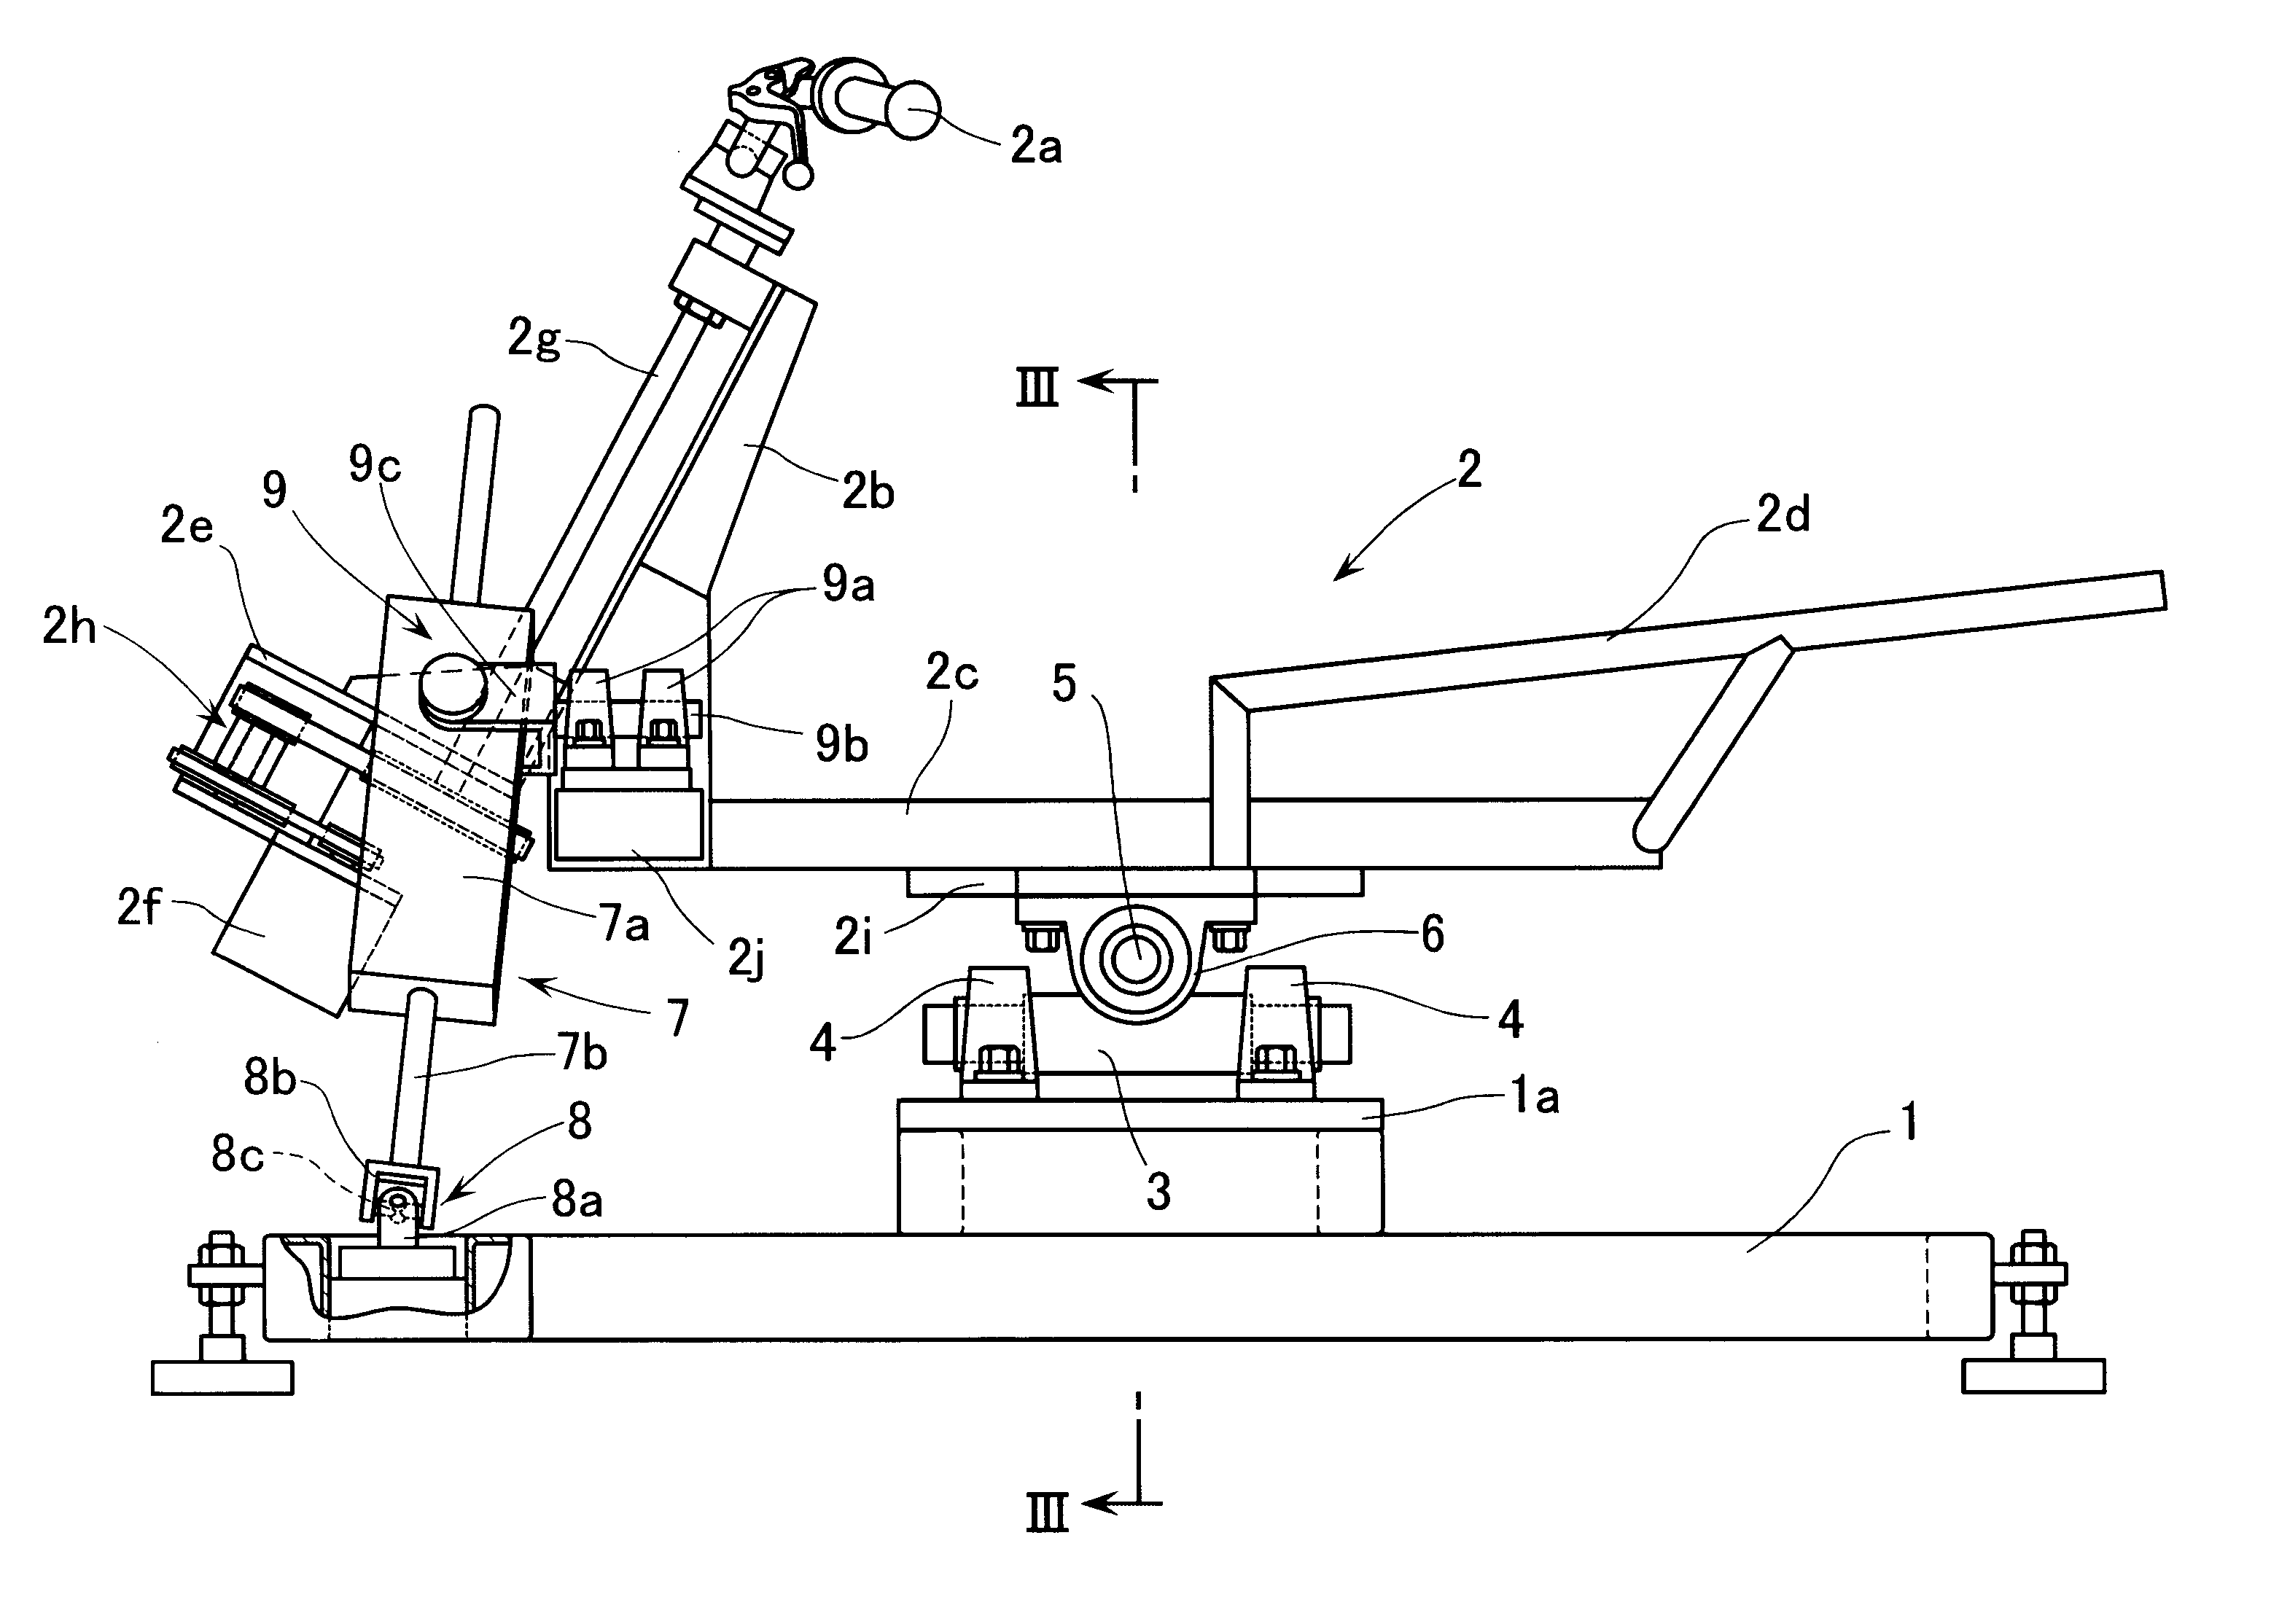 Apparatus for simulating ride on vehicle